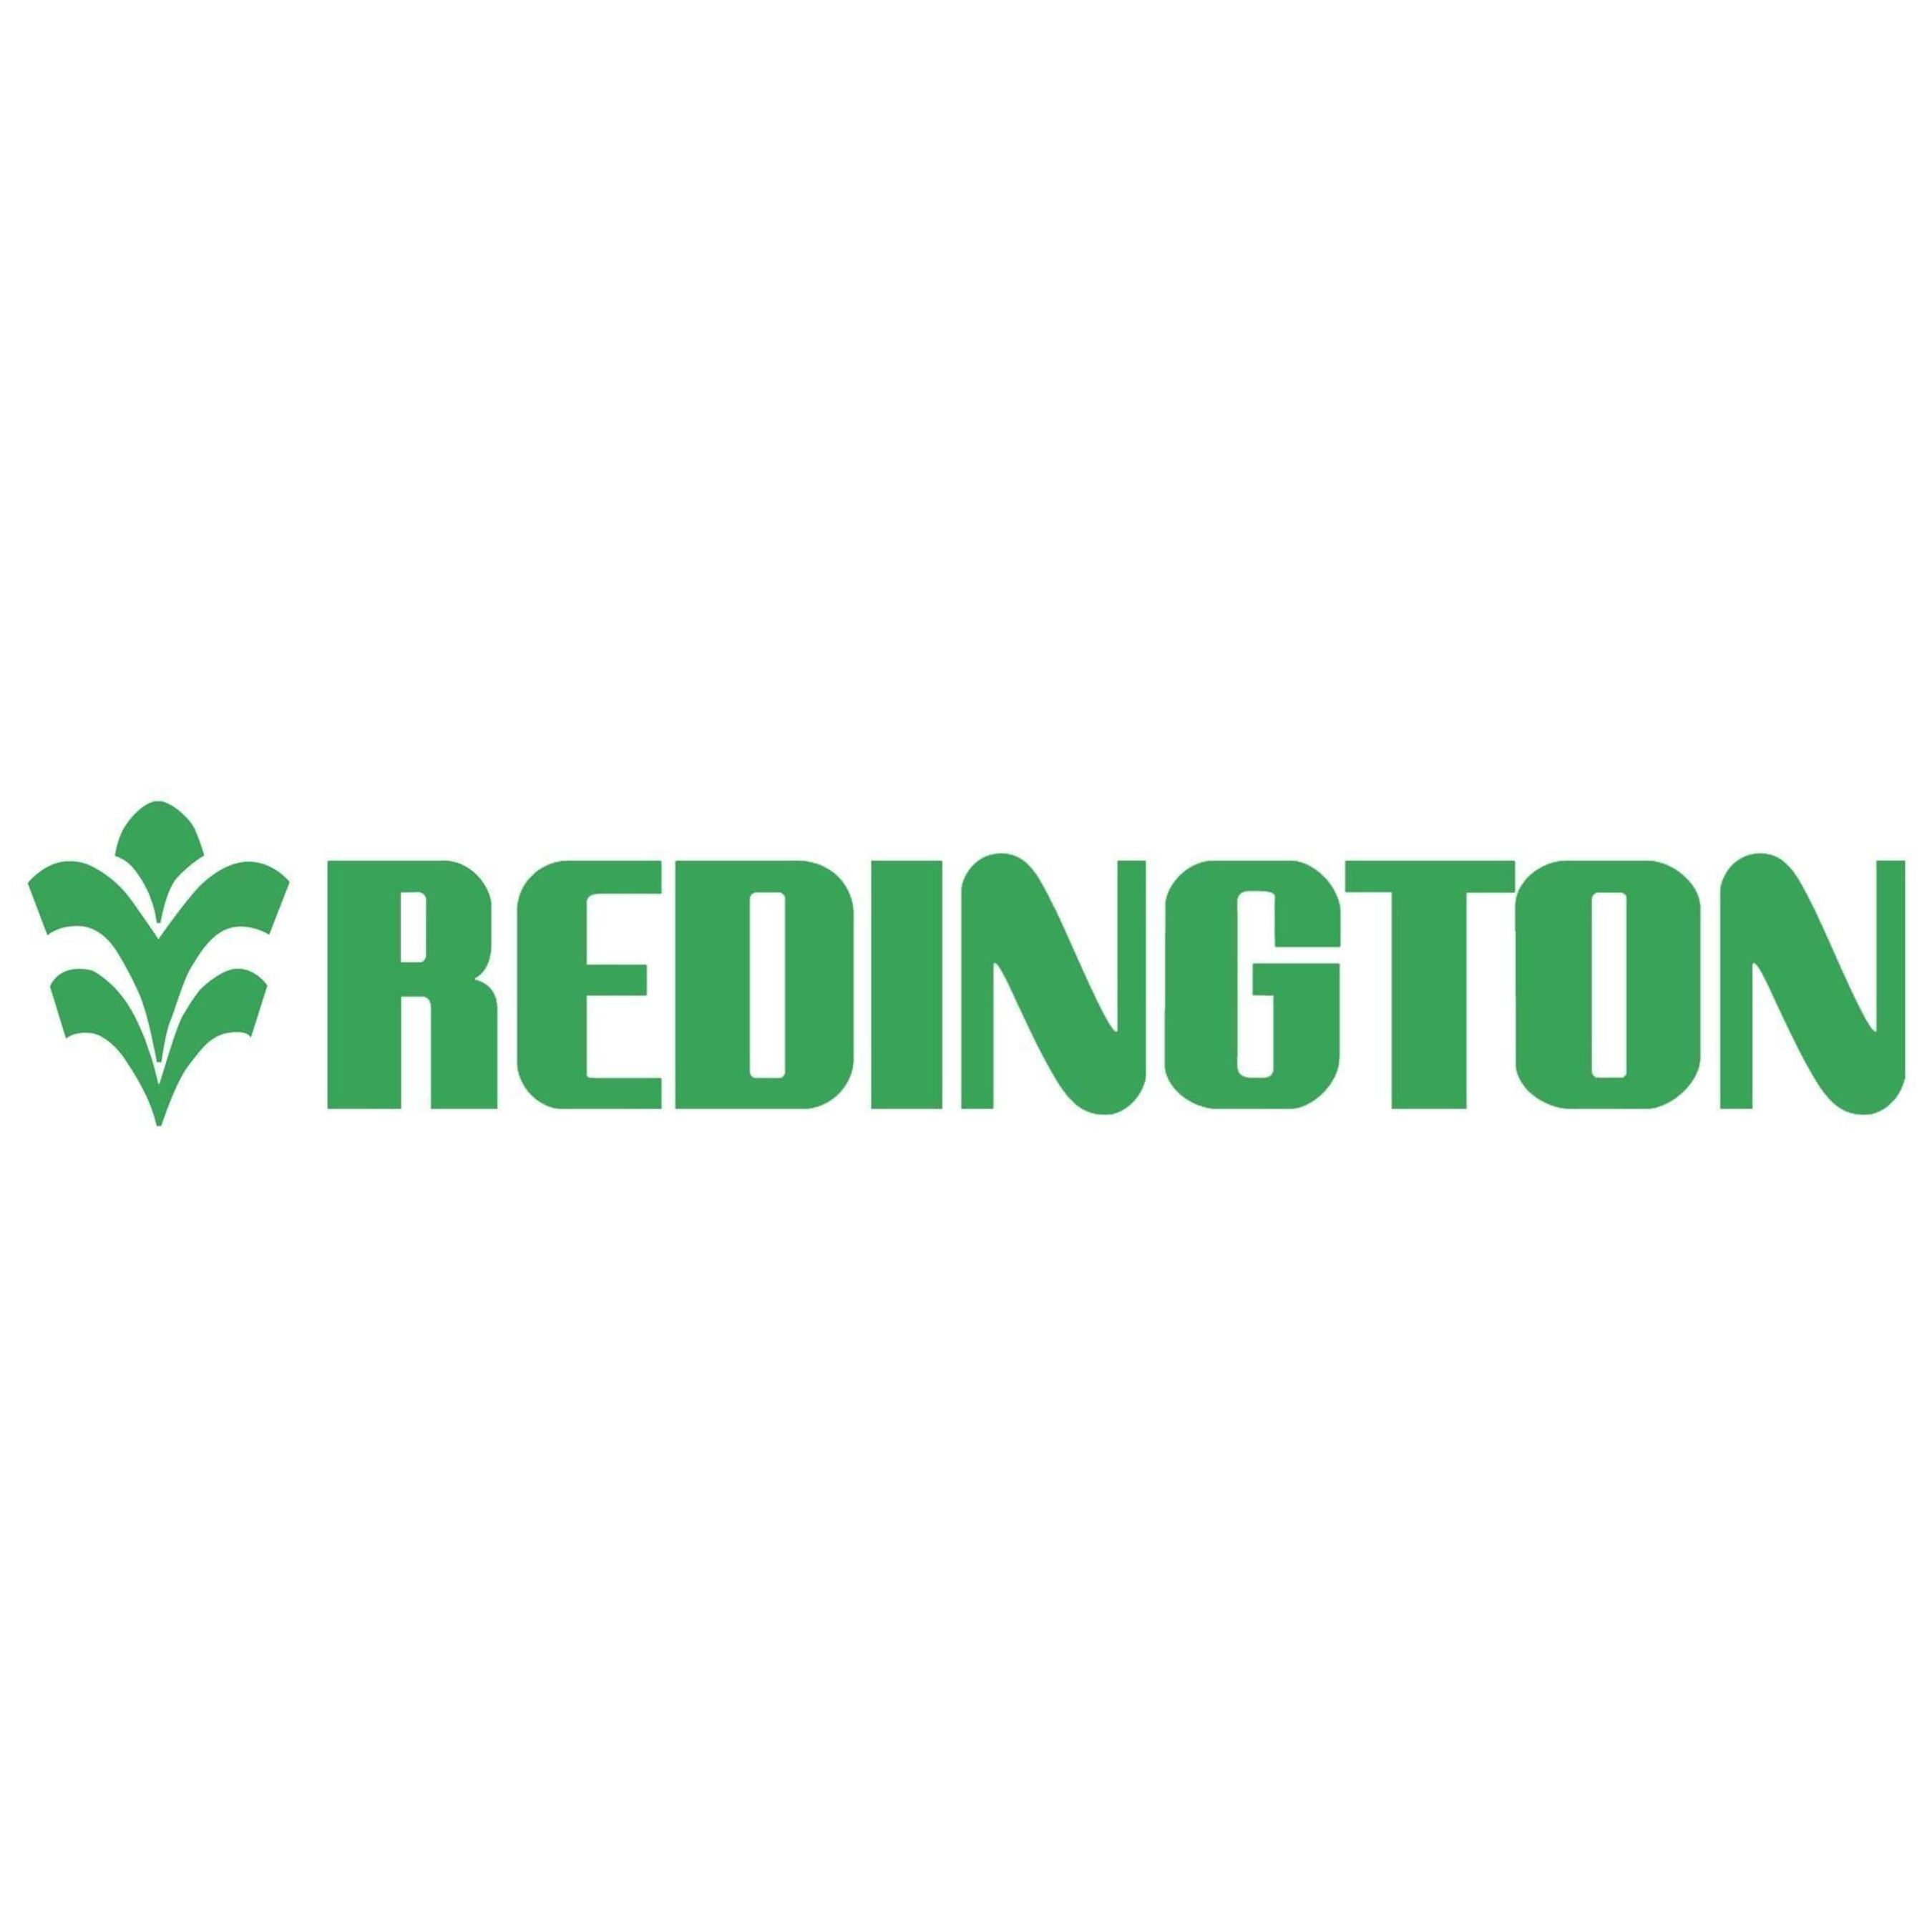 Redington India Ltd. to Offer iPhone 6 and iPhone 6 Plus in India